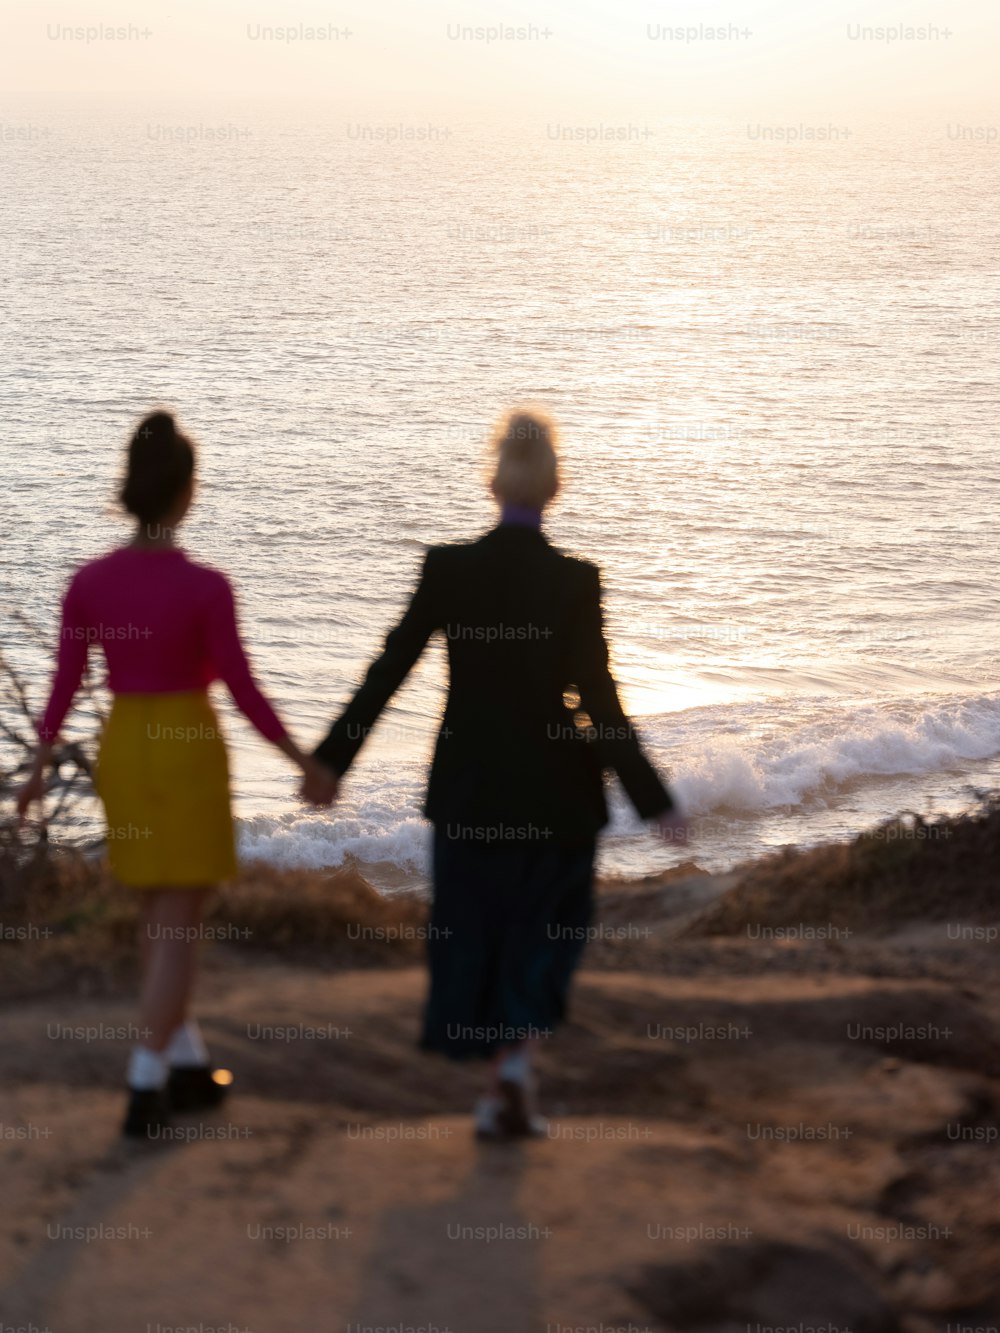 a man and a woman walking on a beach